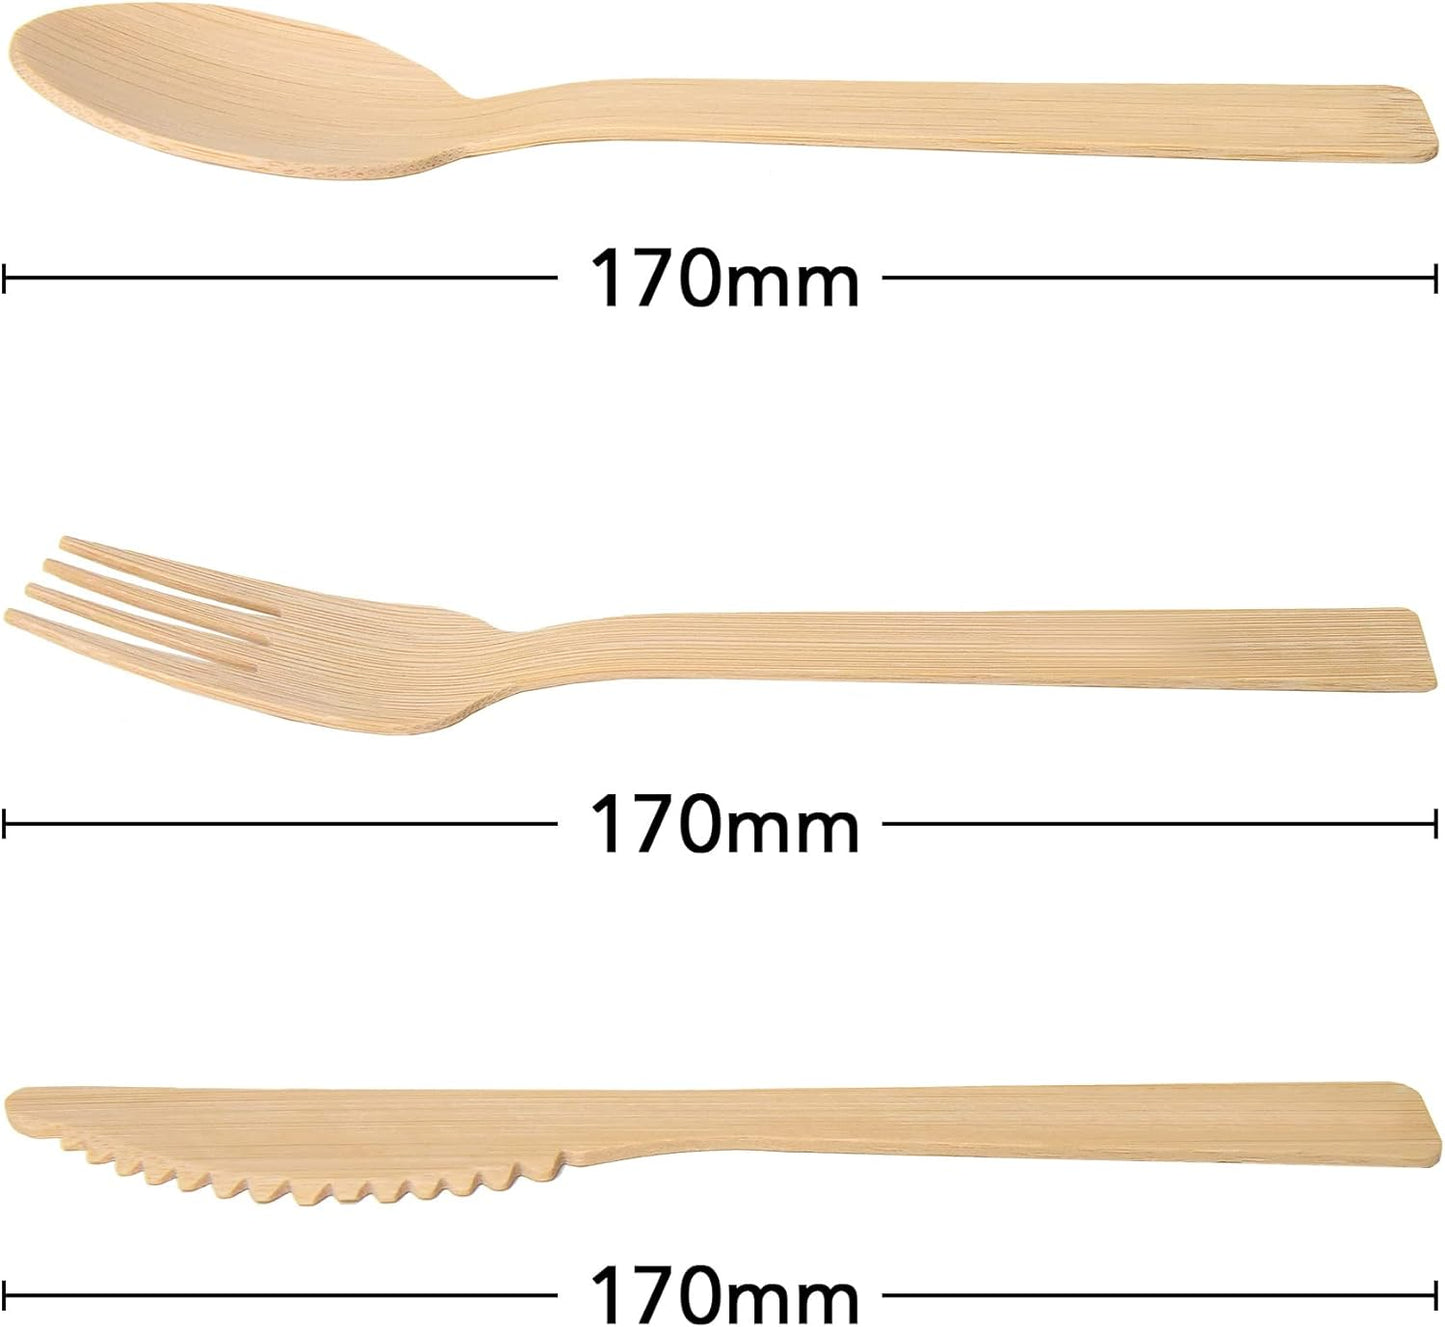 size of Disposable Cutlery Bamboo not Birchwood l Eco Friendly Biodegradable Compostable l Set of 45 Pcs (15 Forks 15 Spoons 15 Knives)